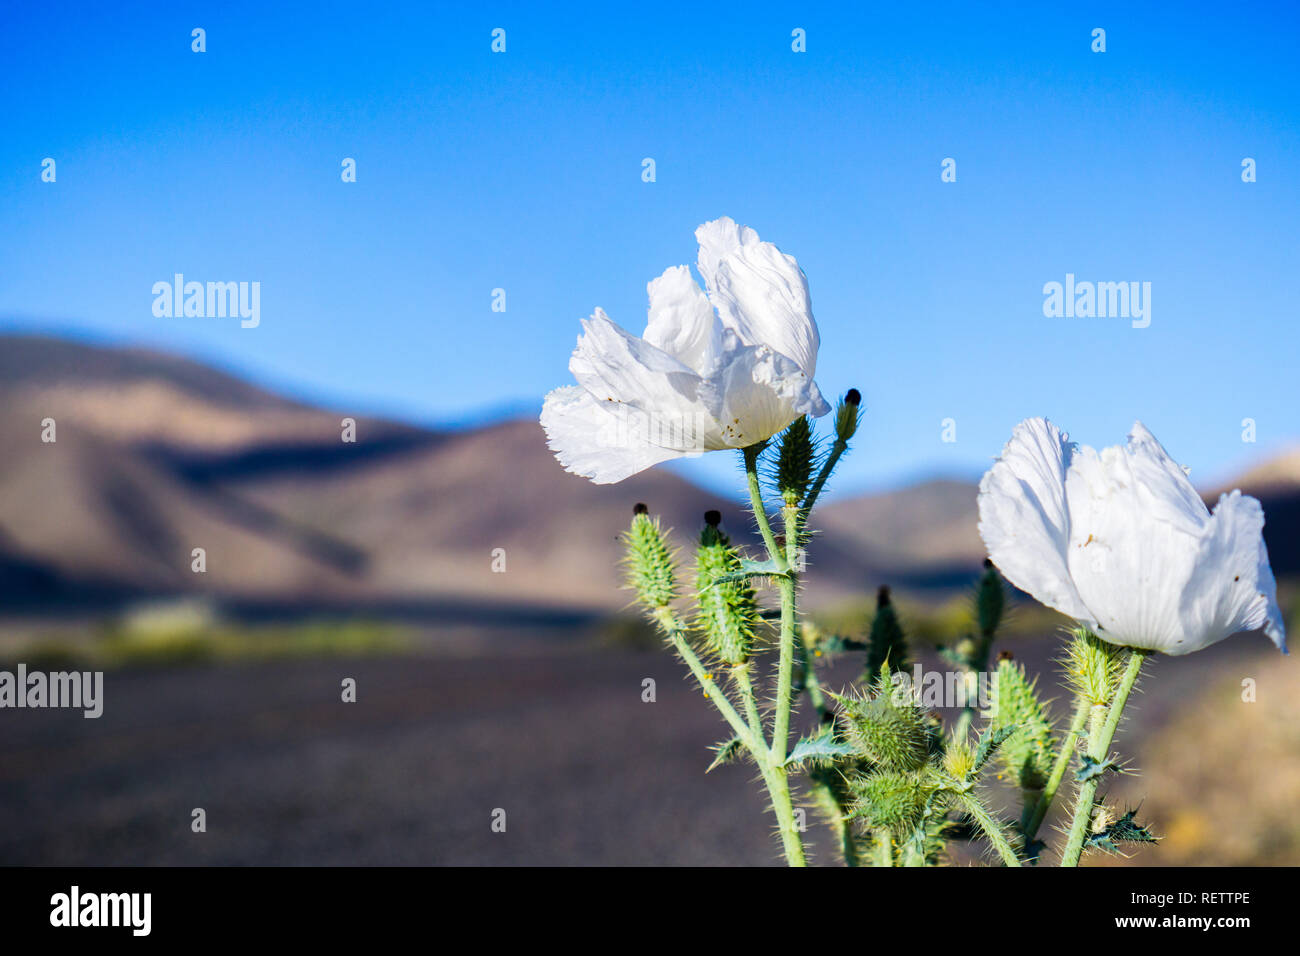 Prickly Poppy (Argemone munita) growing on the side of the road in the mountains of Death Valley, California Stock Photo